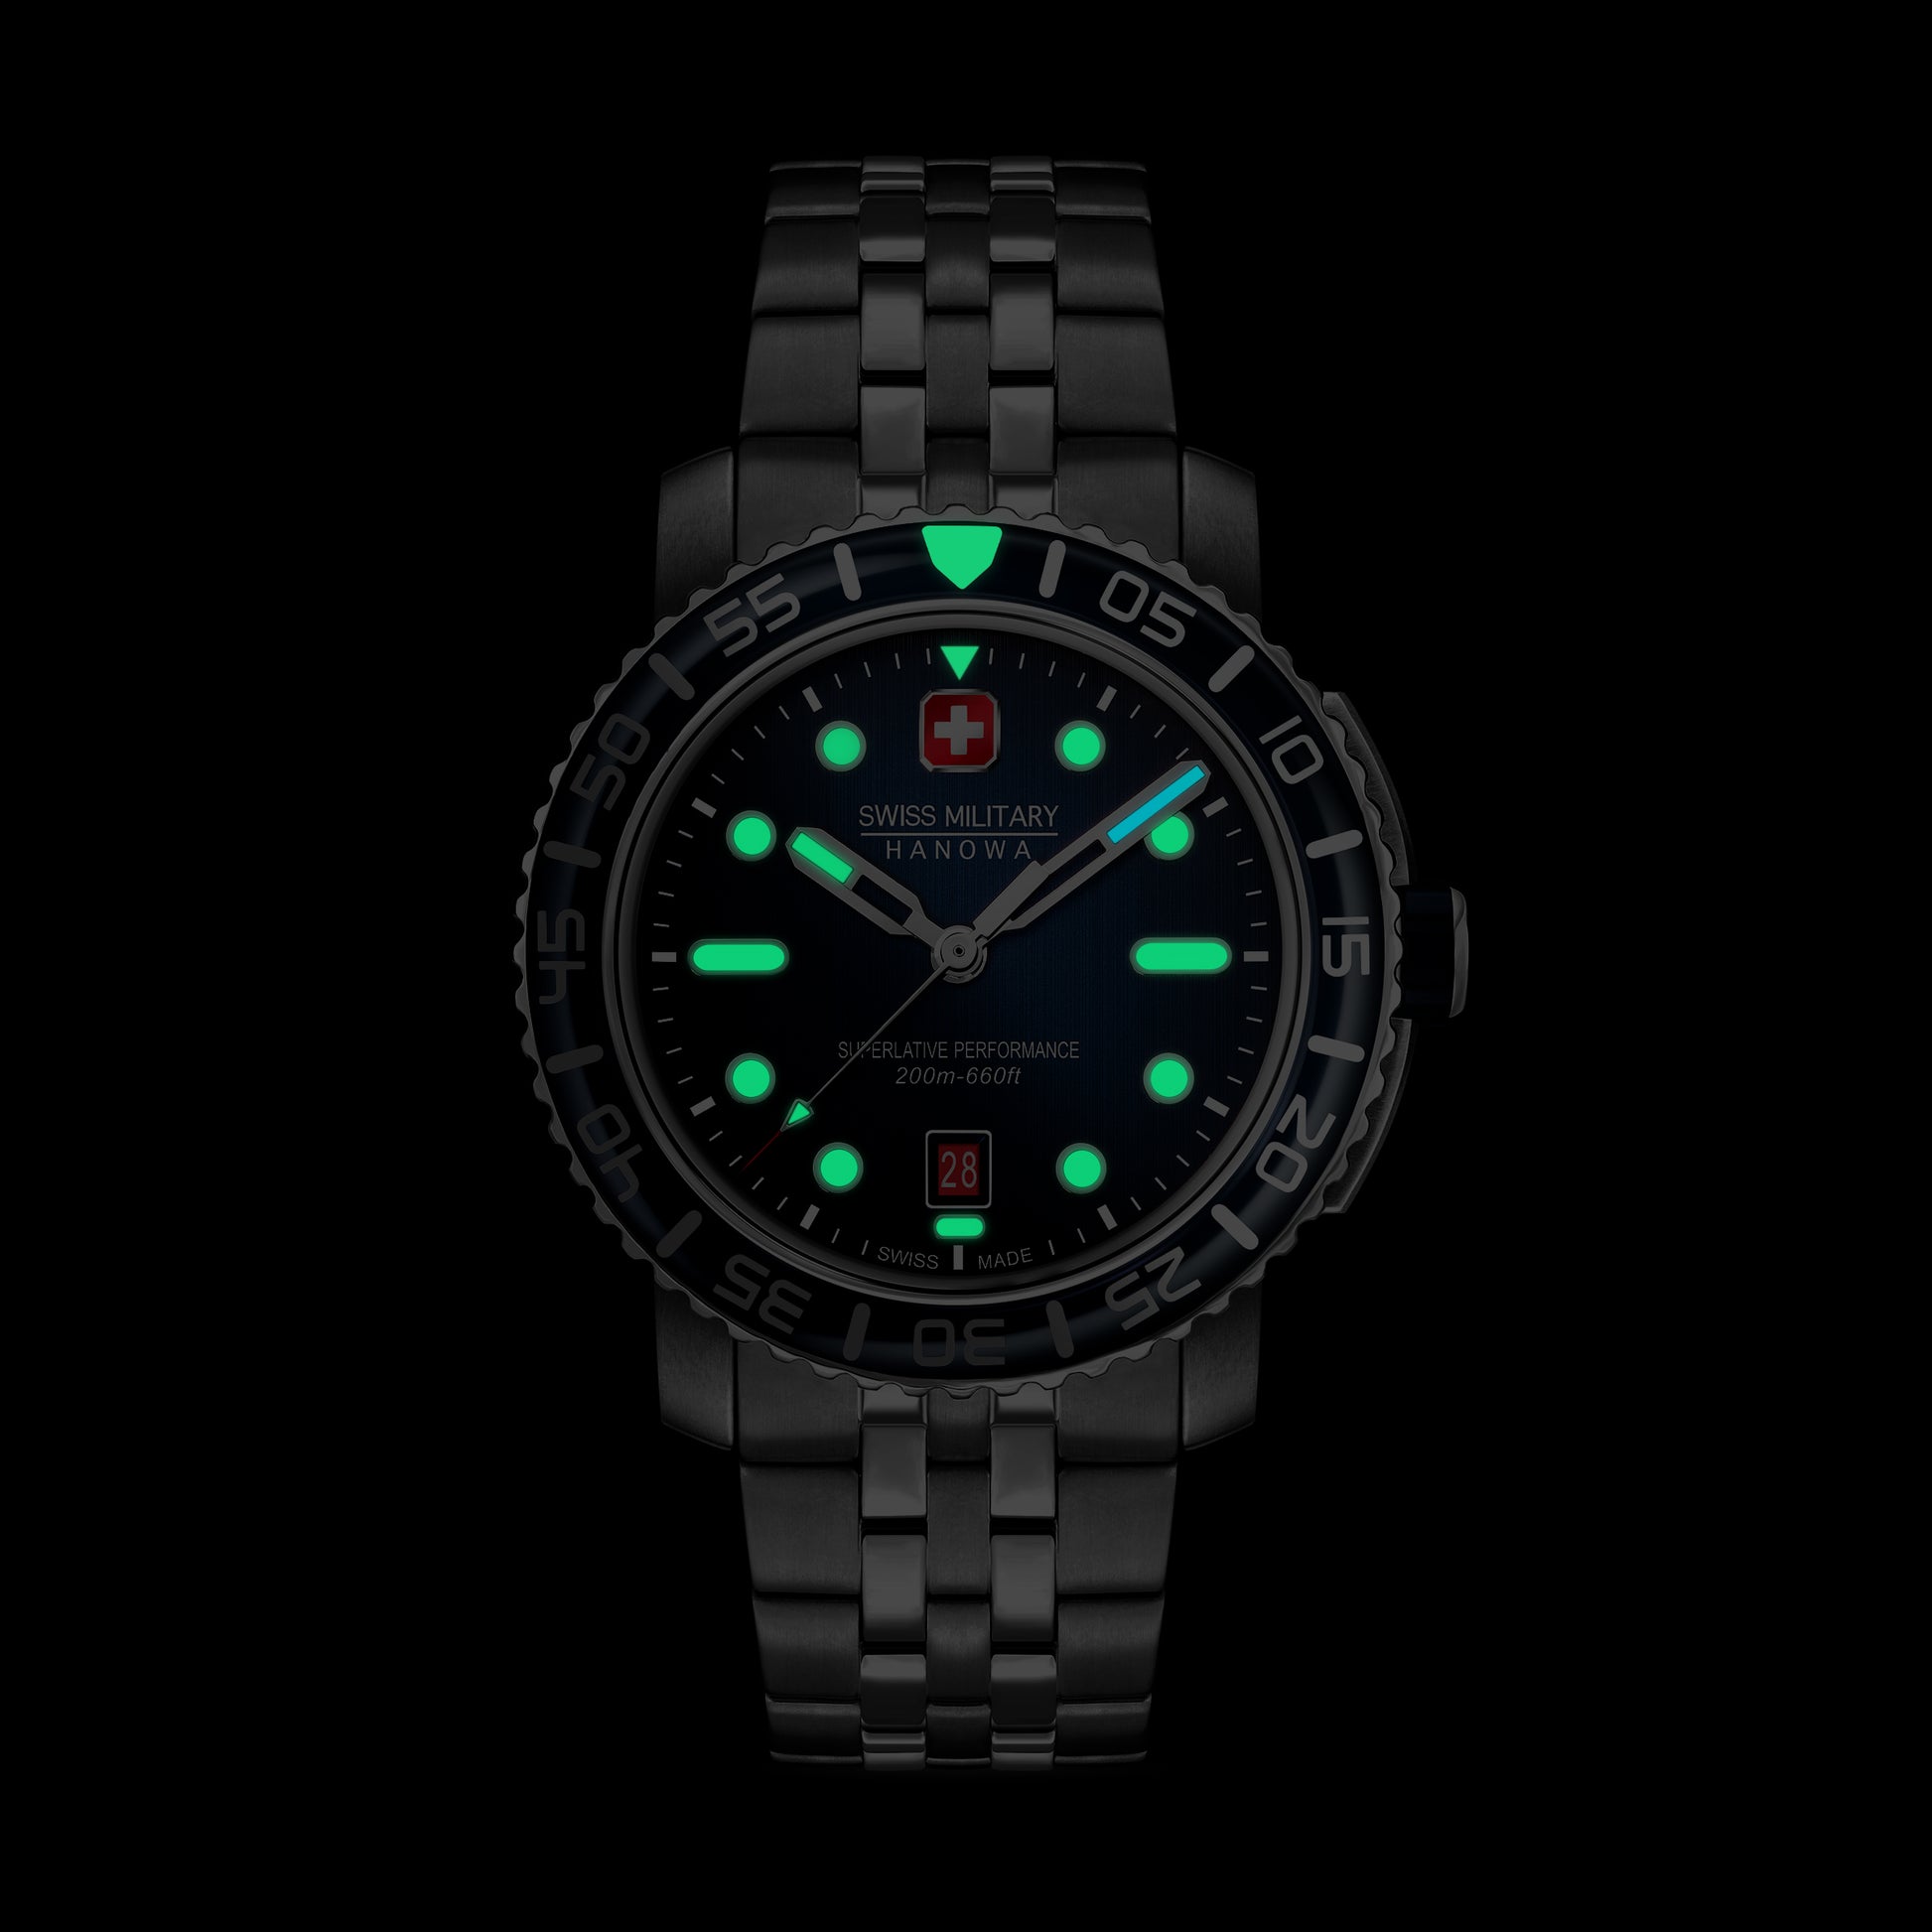 Swiss Military Hanowa Black Marlin SMWGH0001703 , Stainless steel case, blue dial, Stainless steel bracelet. Visibility in the dark through luminous.